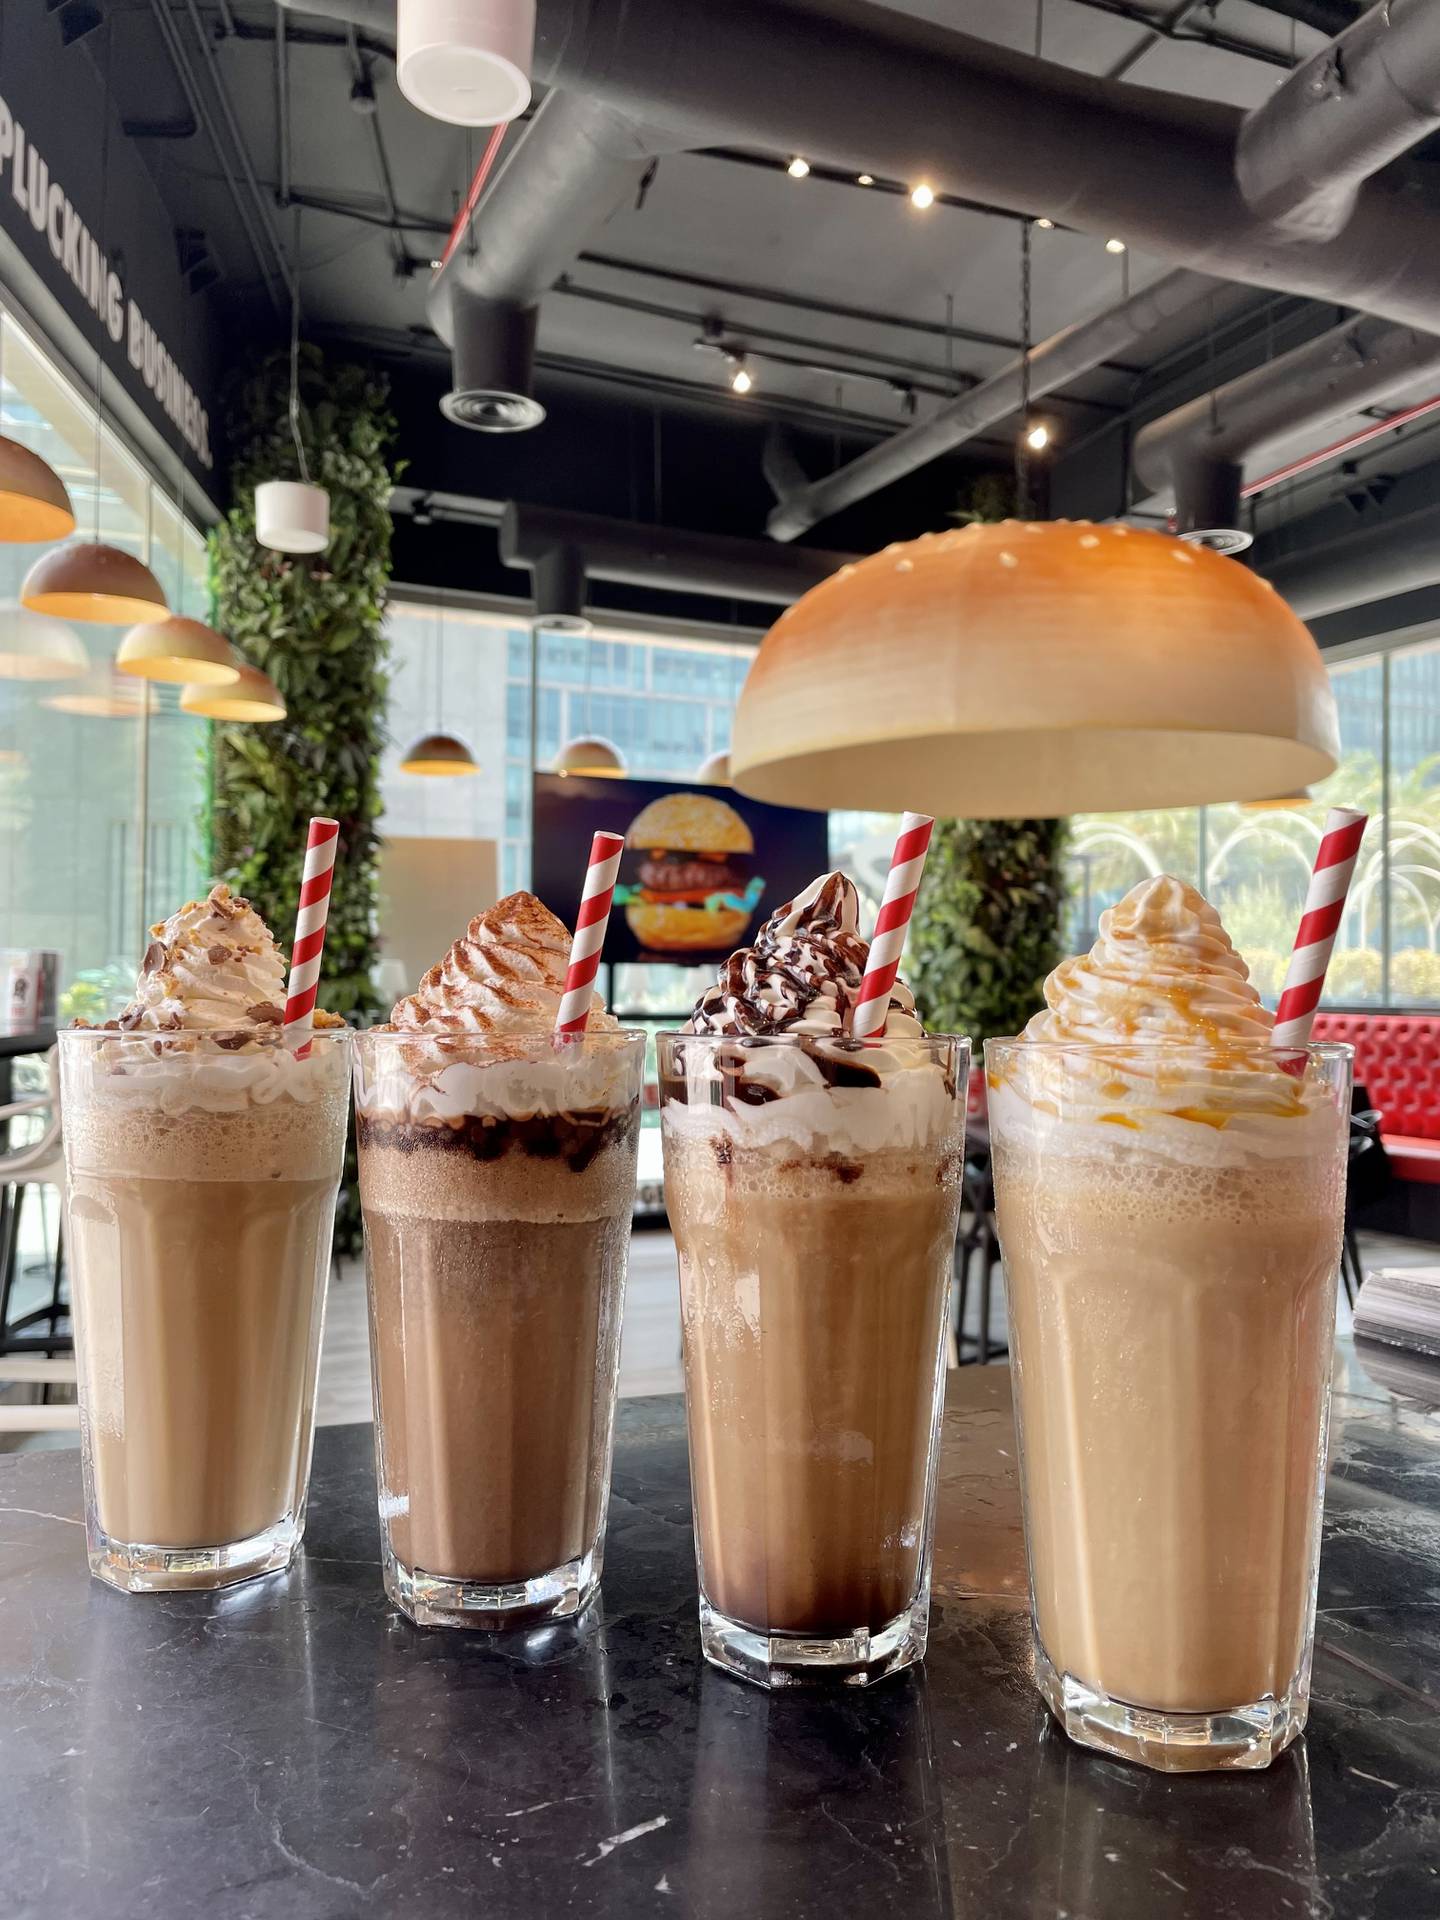 Sign up for a three-month specialty coffee package at Bite Me Burger and get unlimited free coffee for a month